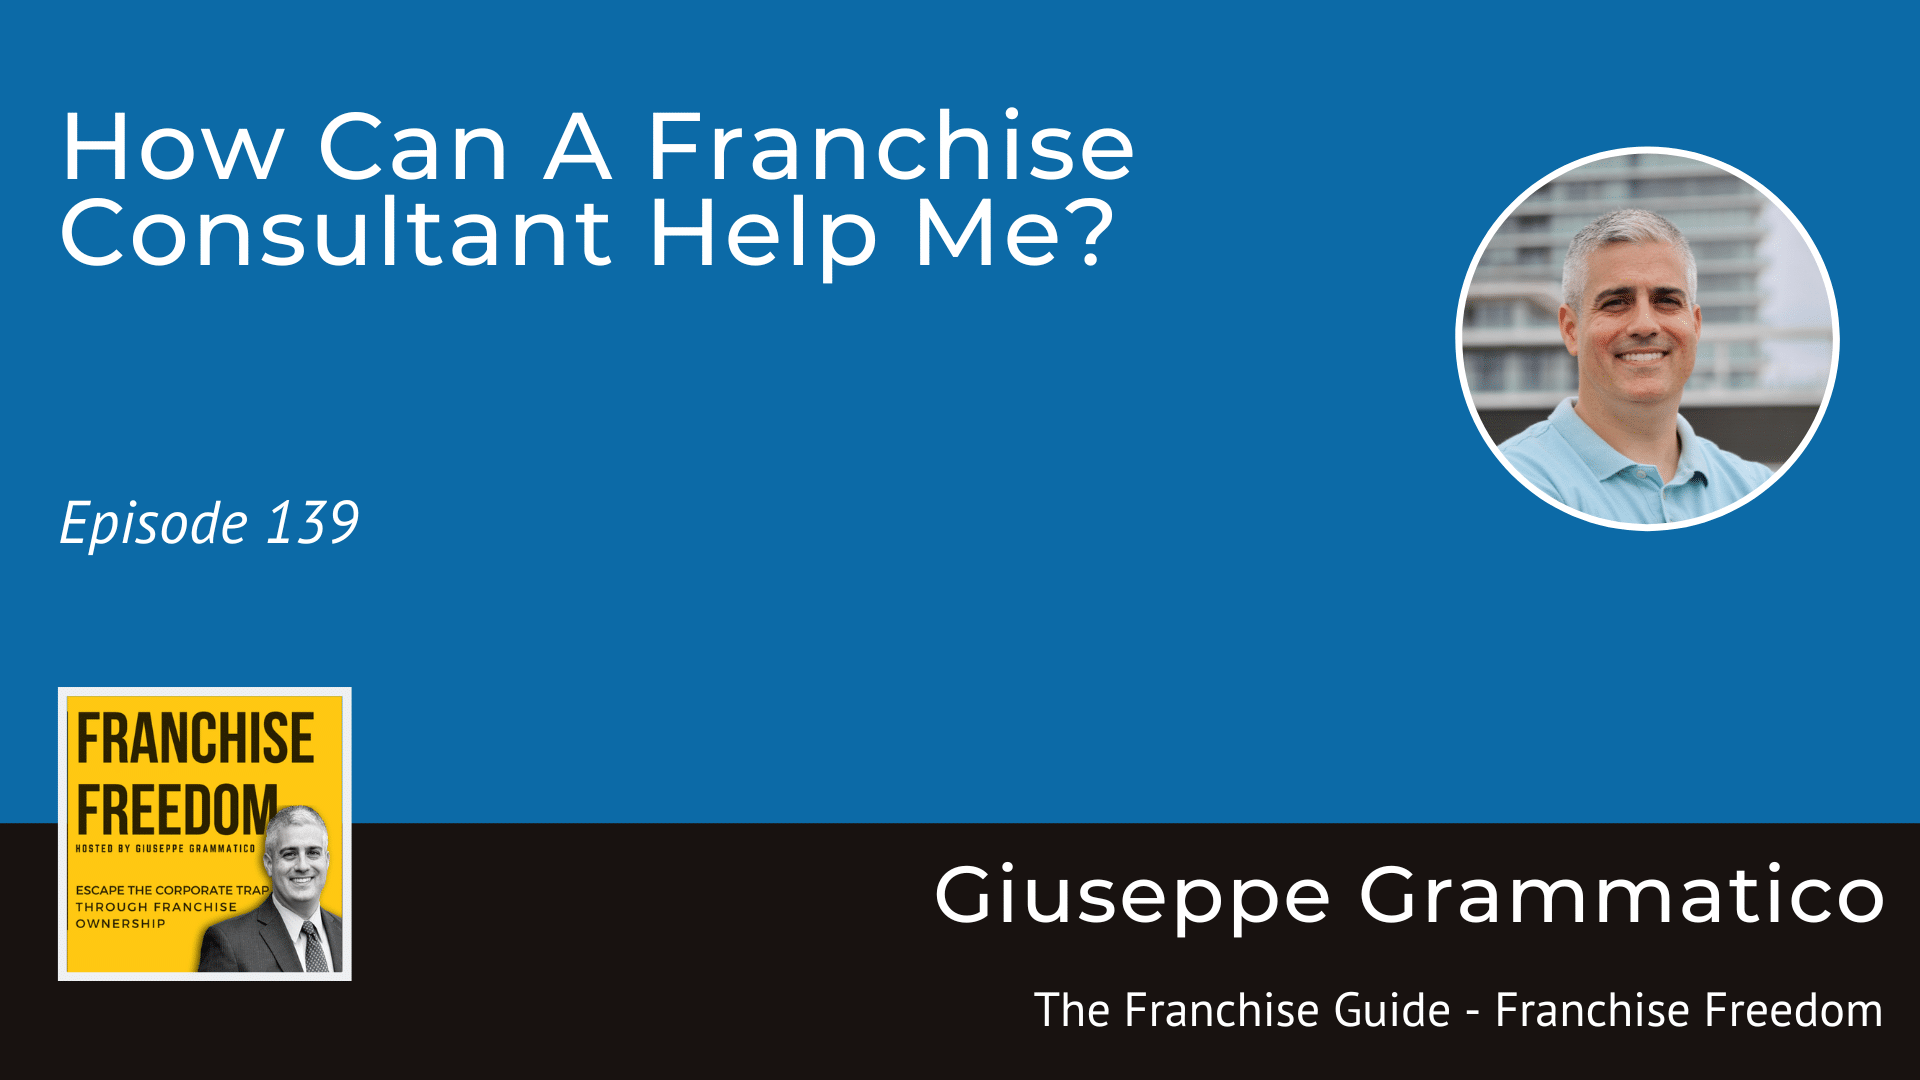 How Can A Franchise Consultant Help Me?